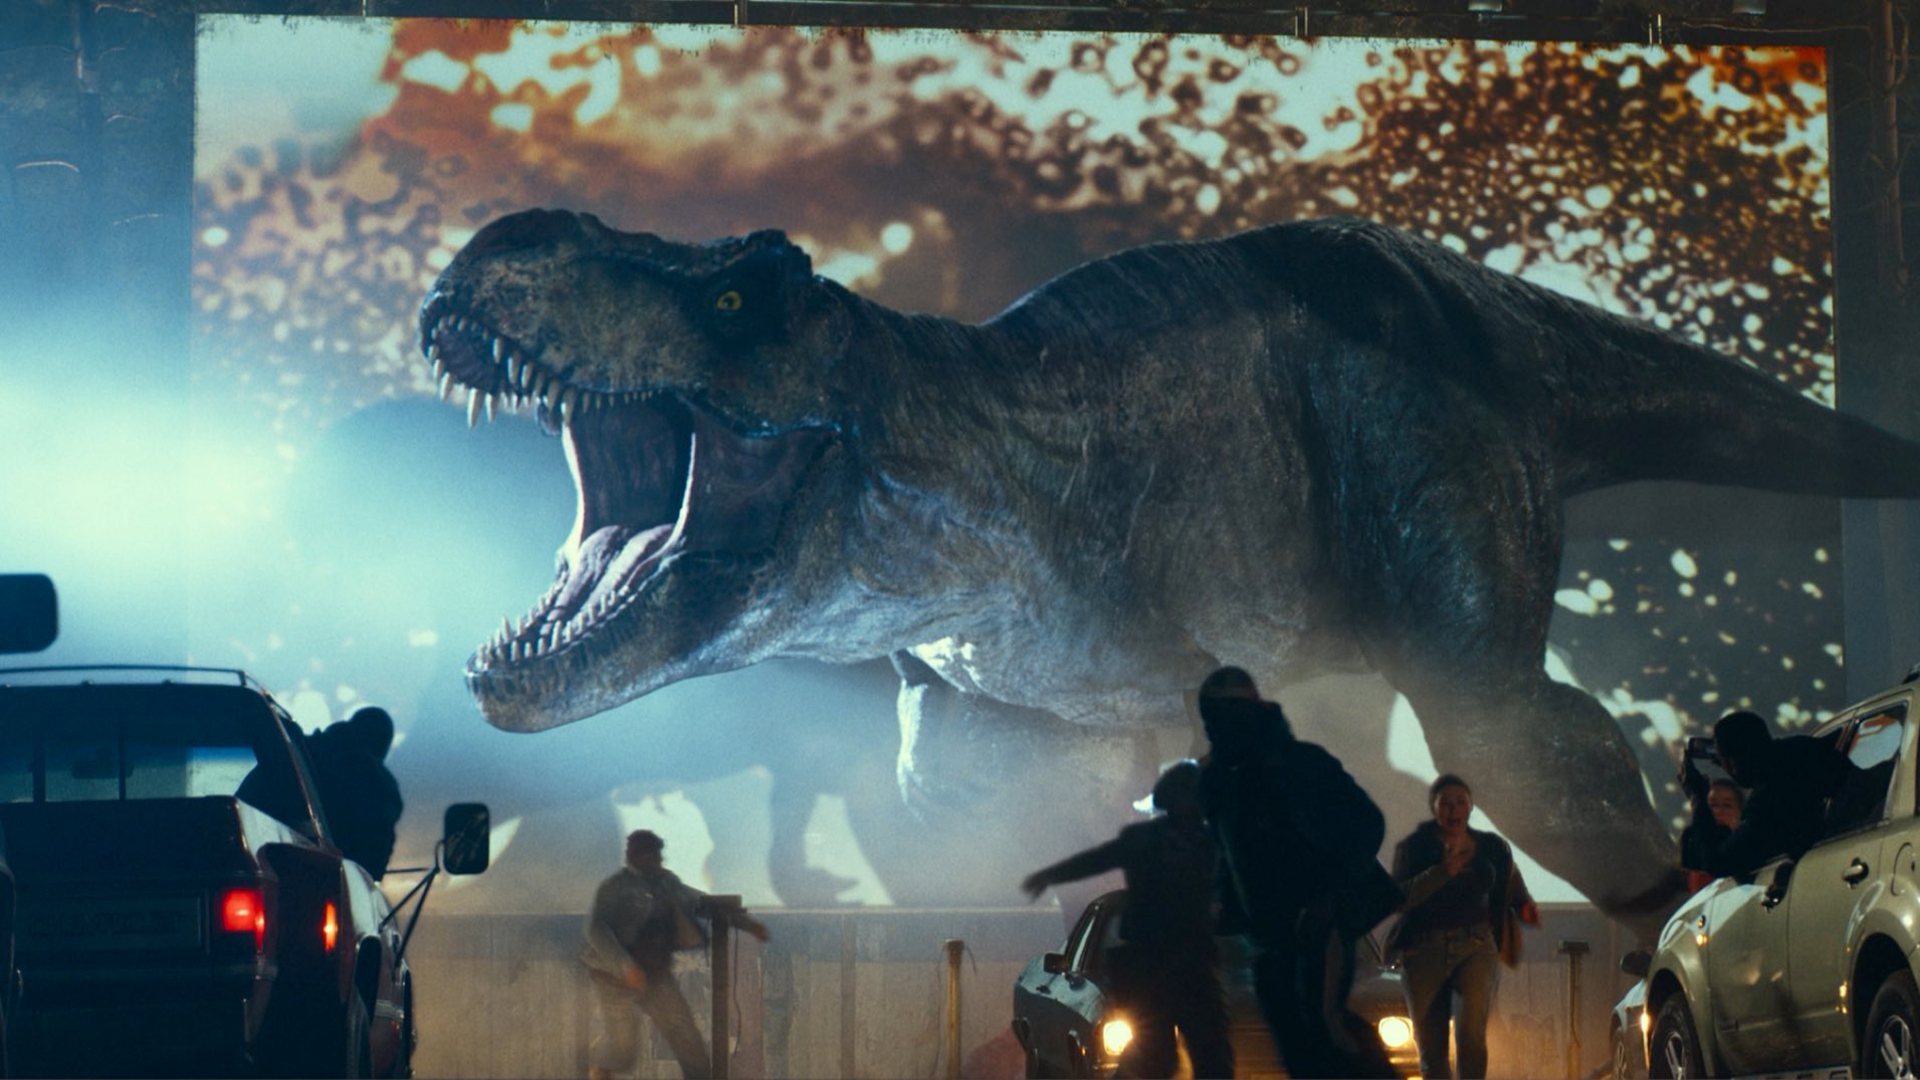 Jurassic World 3: Dominion: release date, trailer, cast, plot details, and more